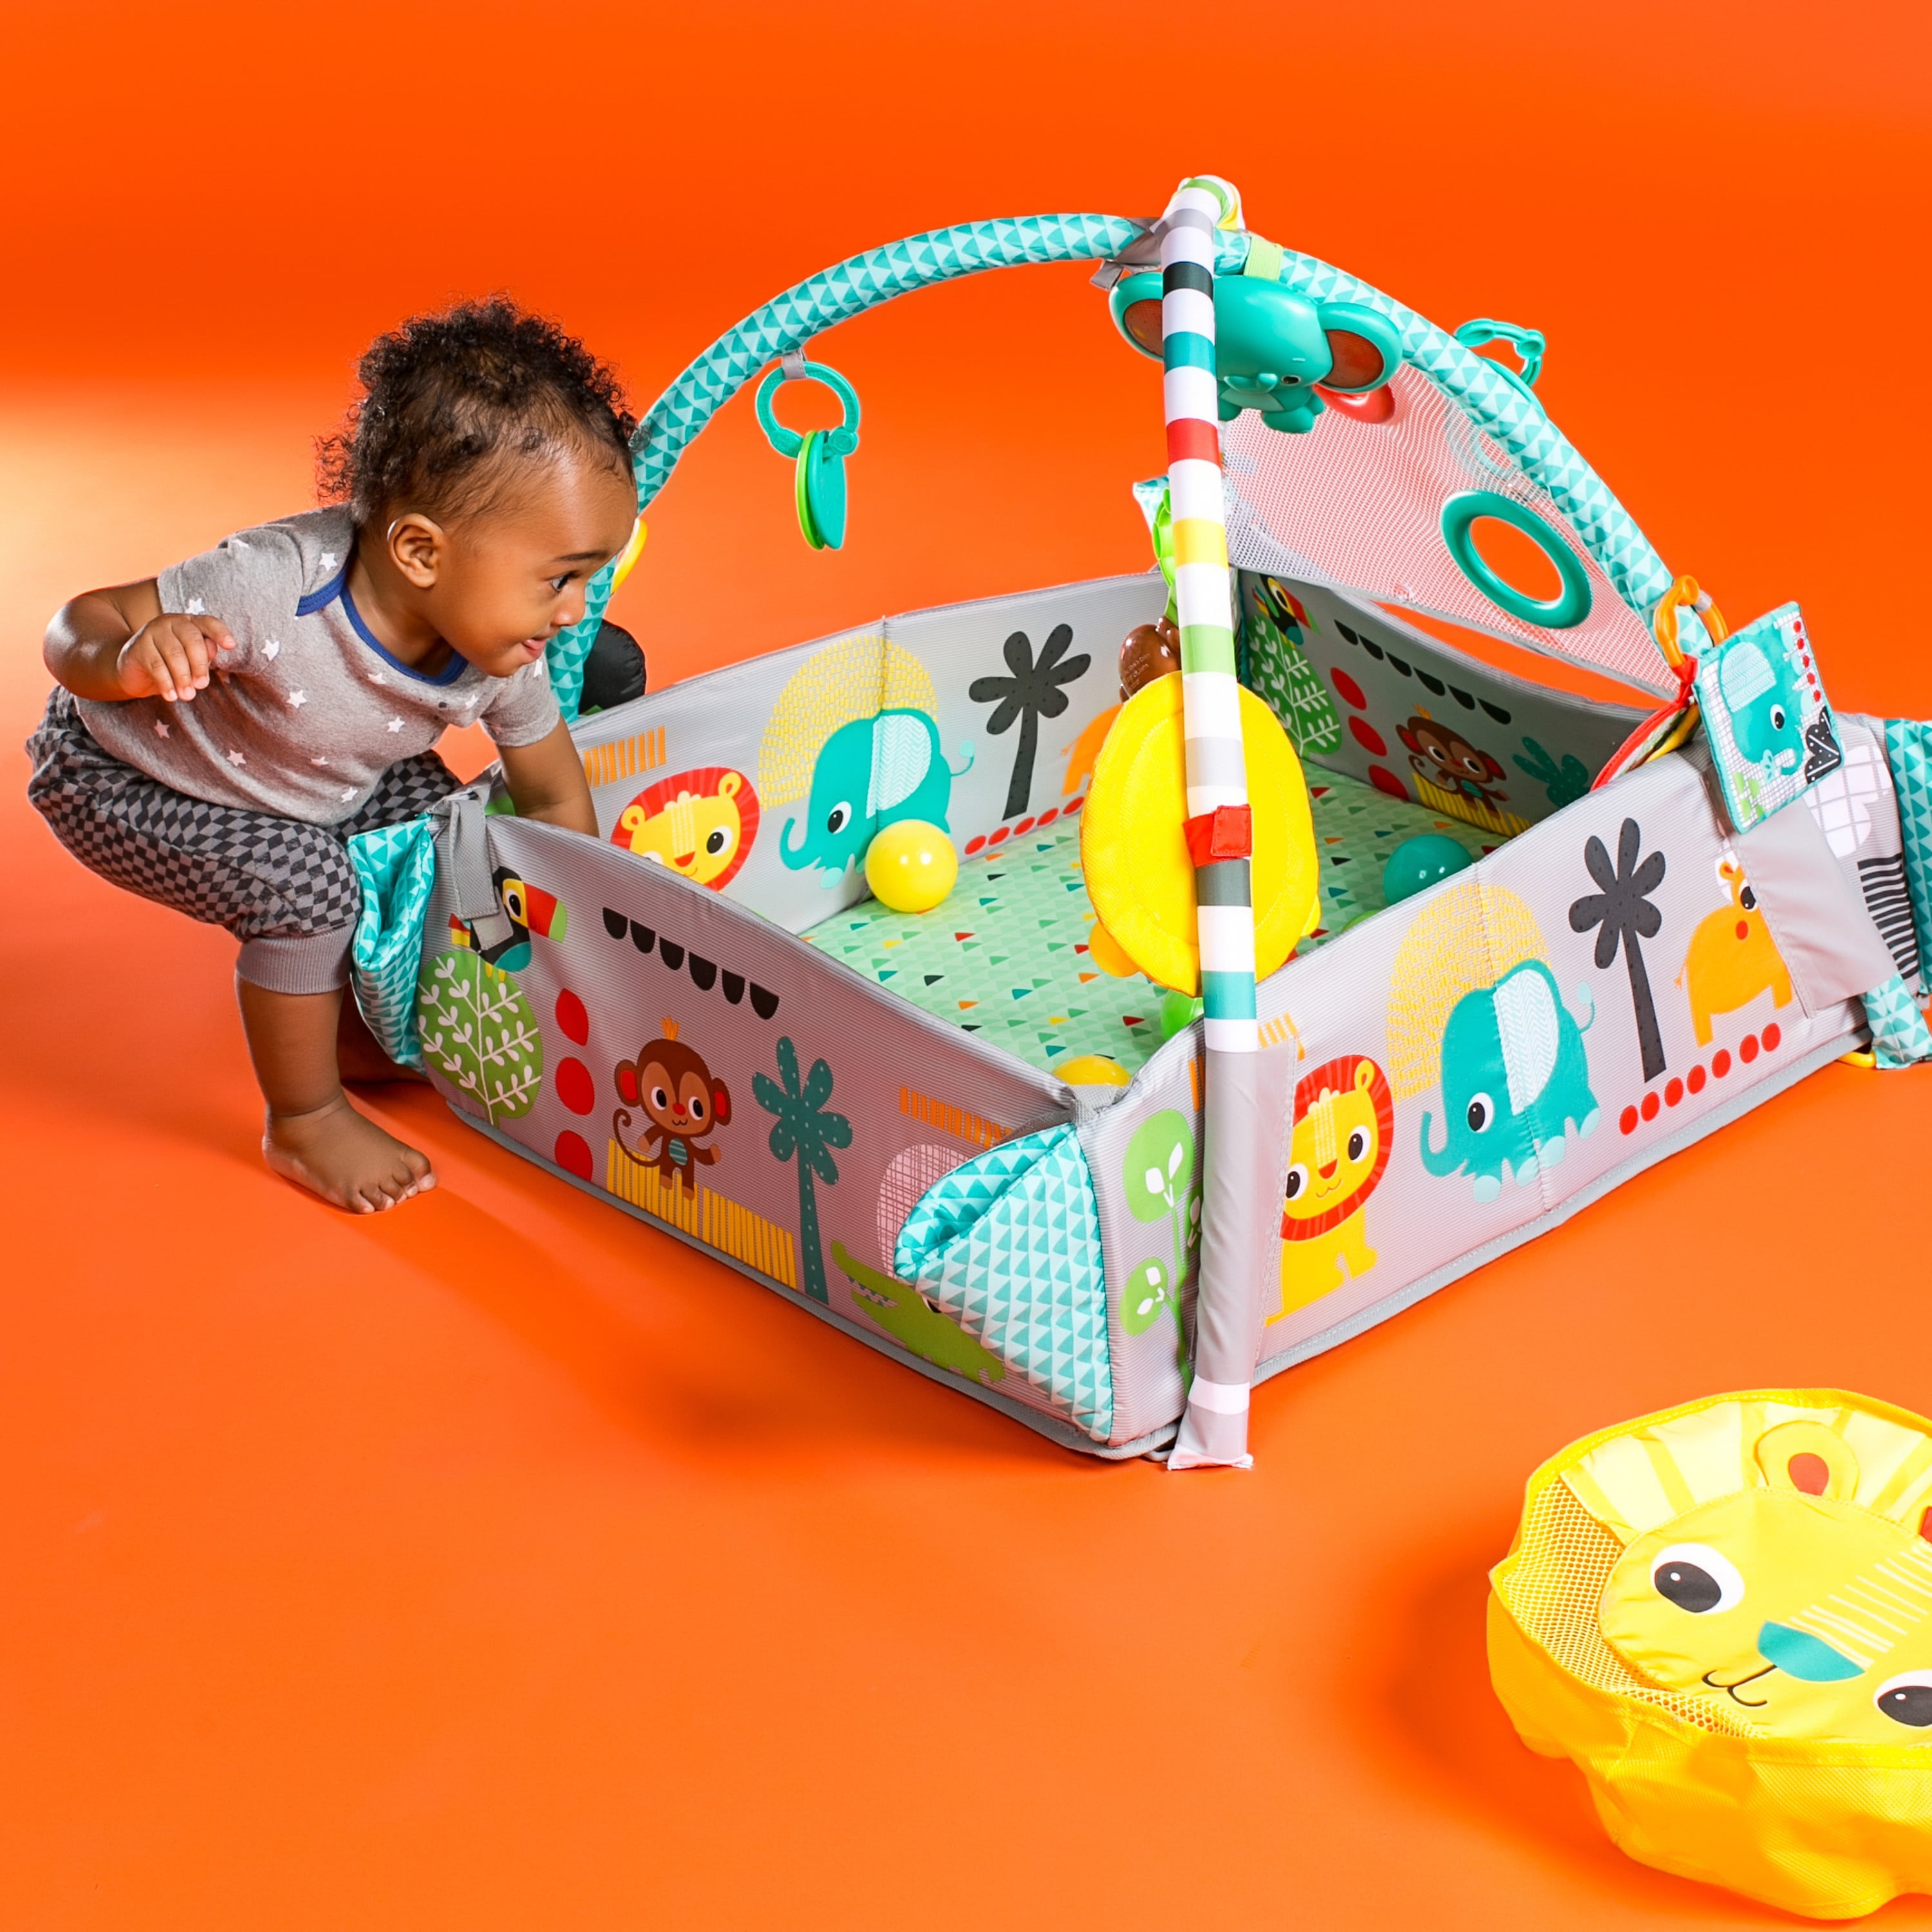 Bright Starts Explore and Go Whale Activity Gym - Happy Little Tadpole